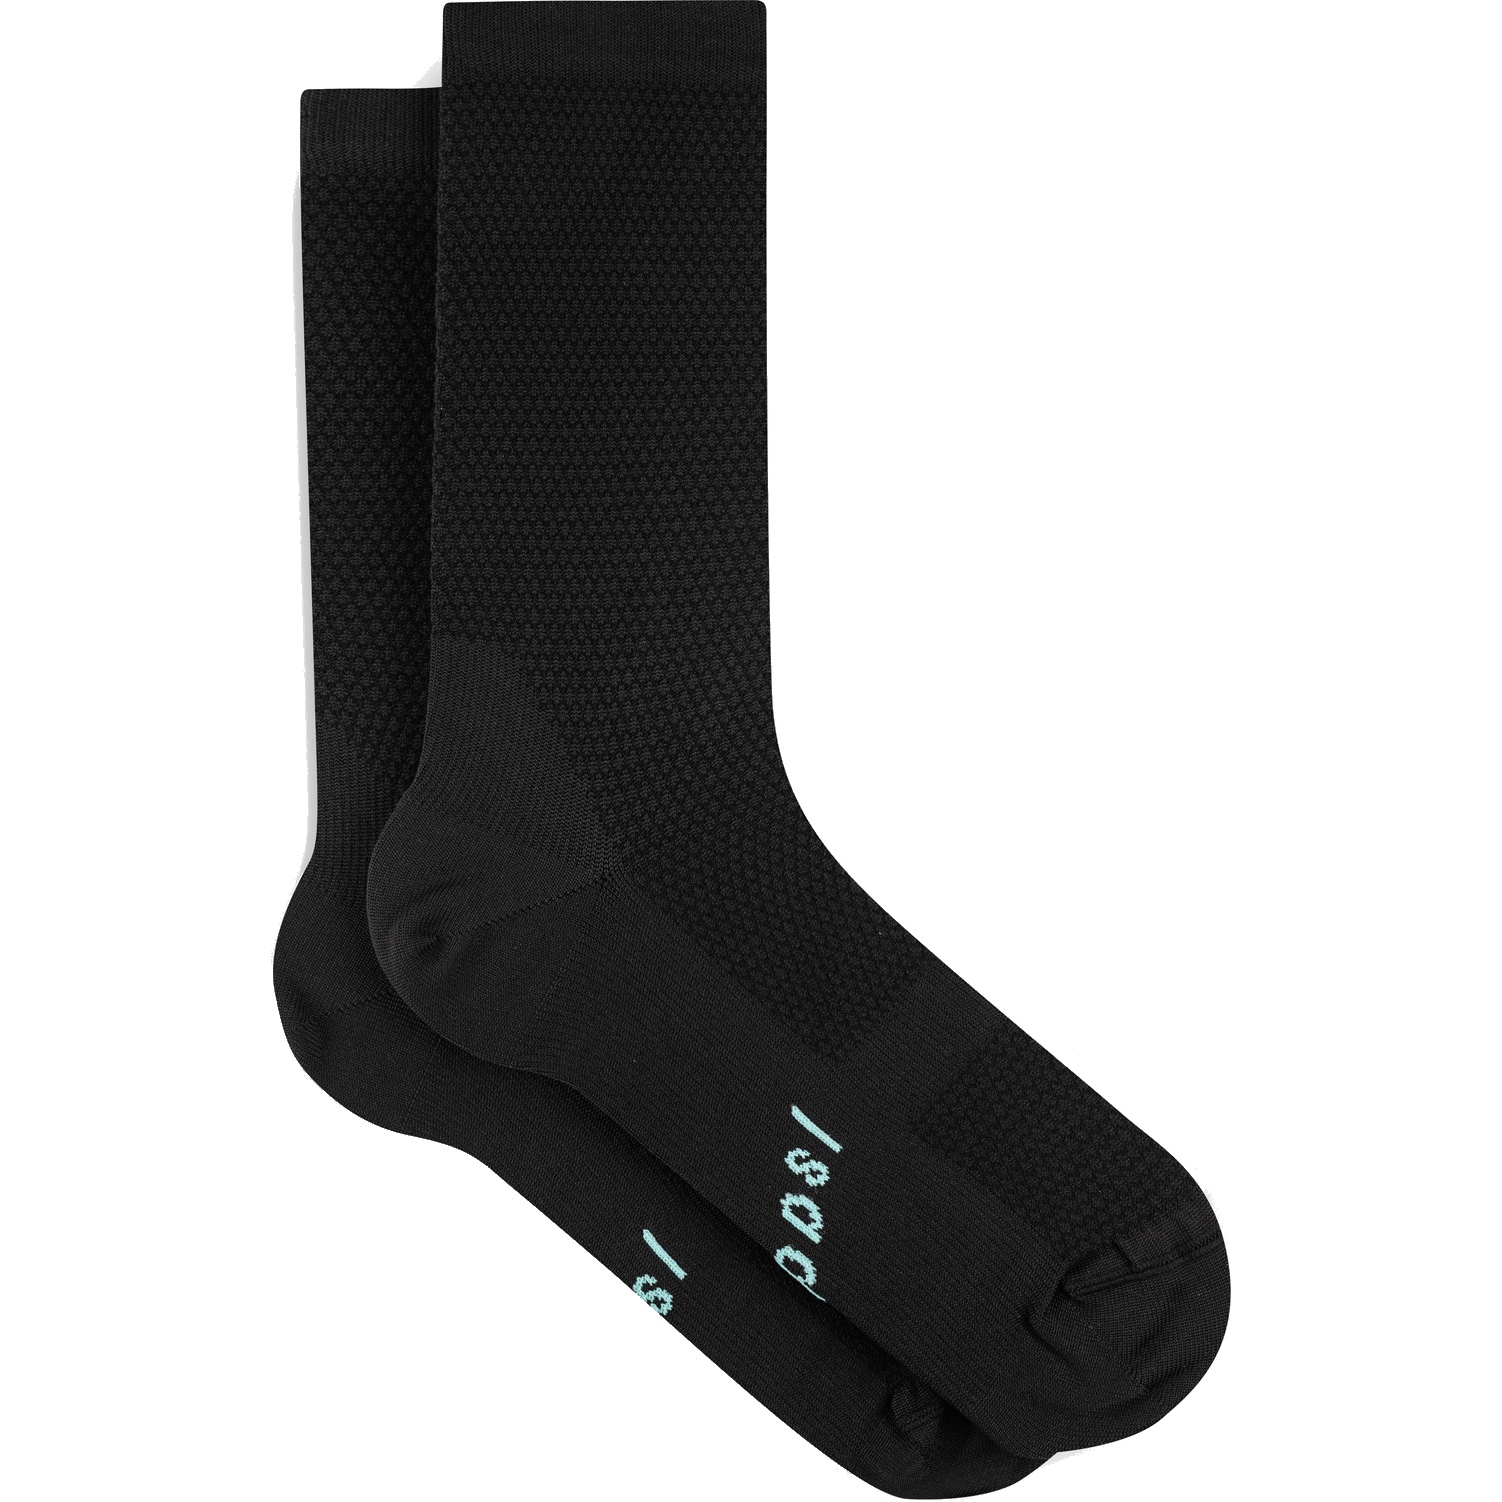 Picture of Isadore Echelon Cycling Socks 2.0 - Black